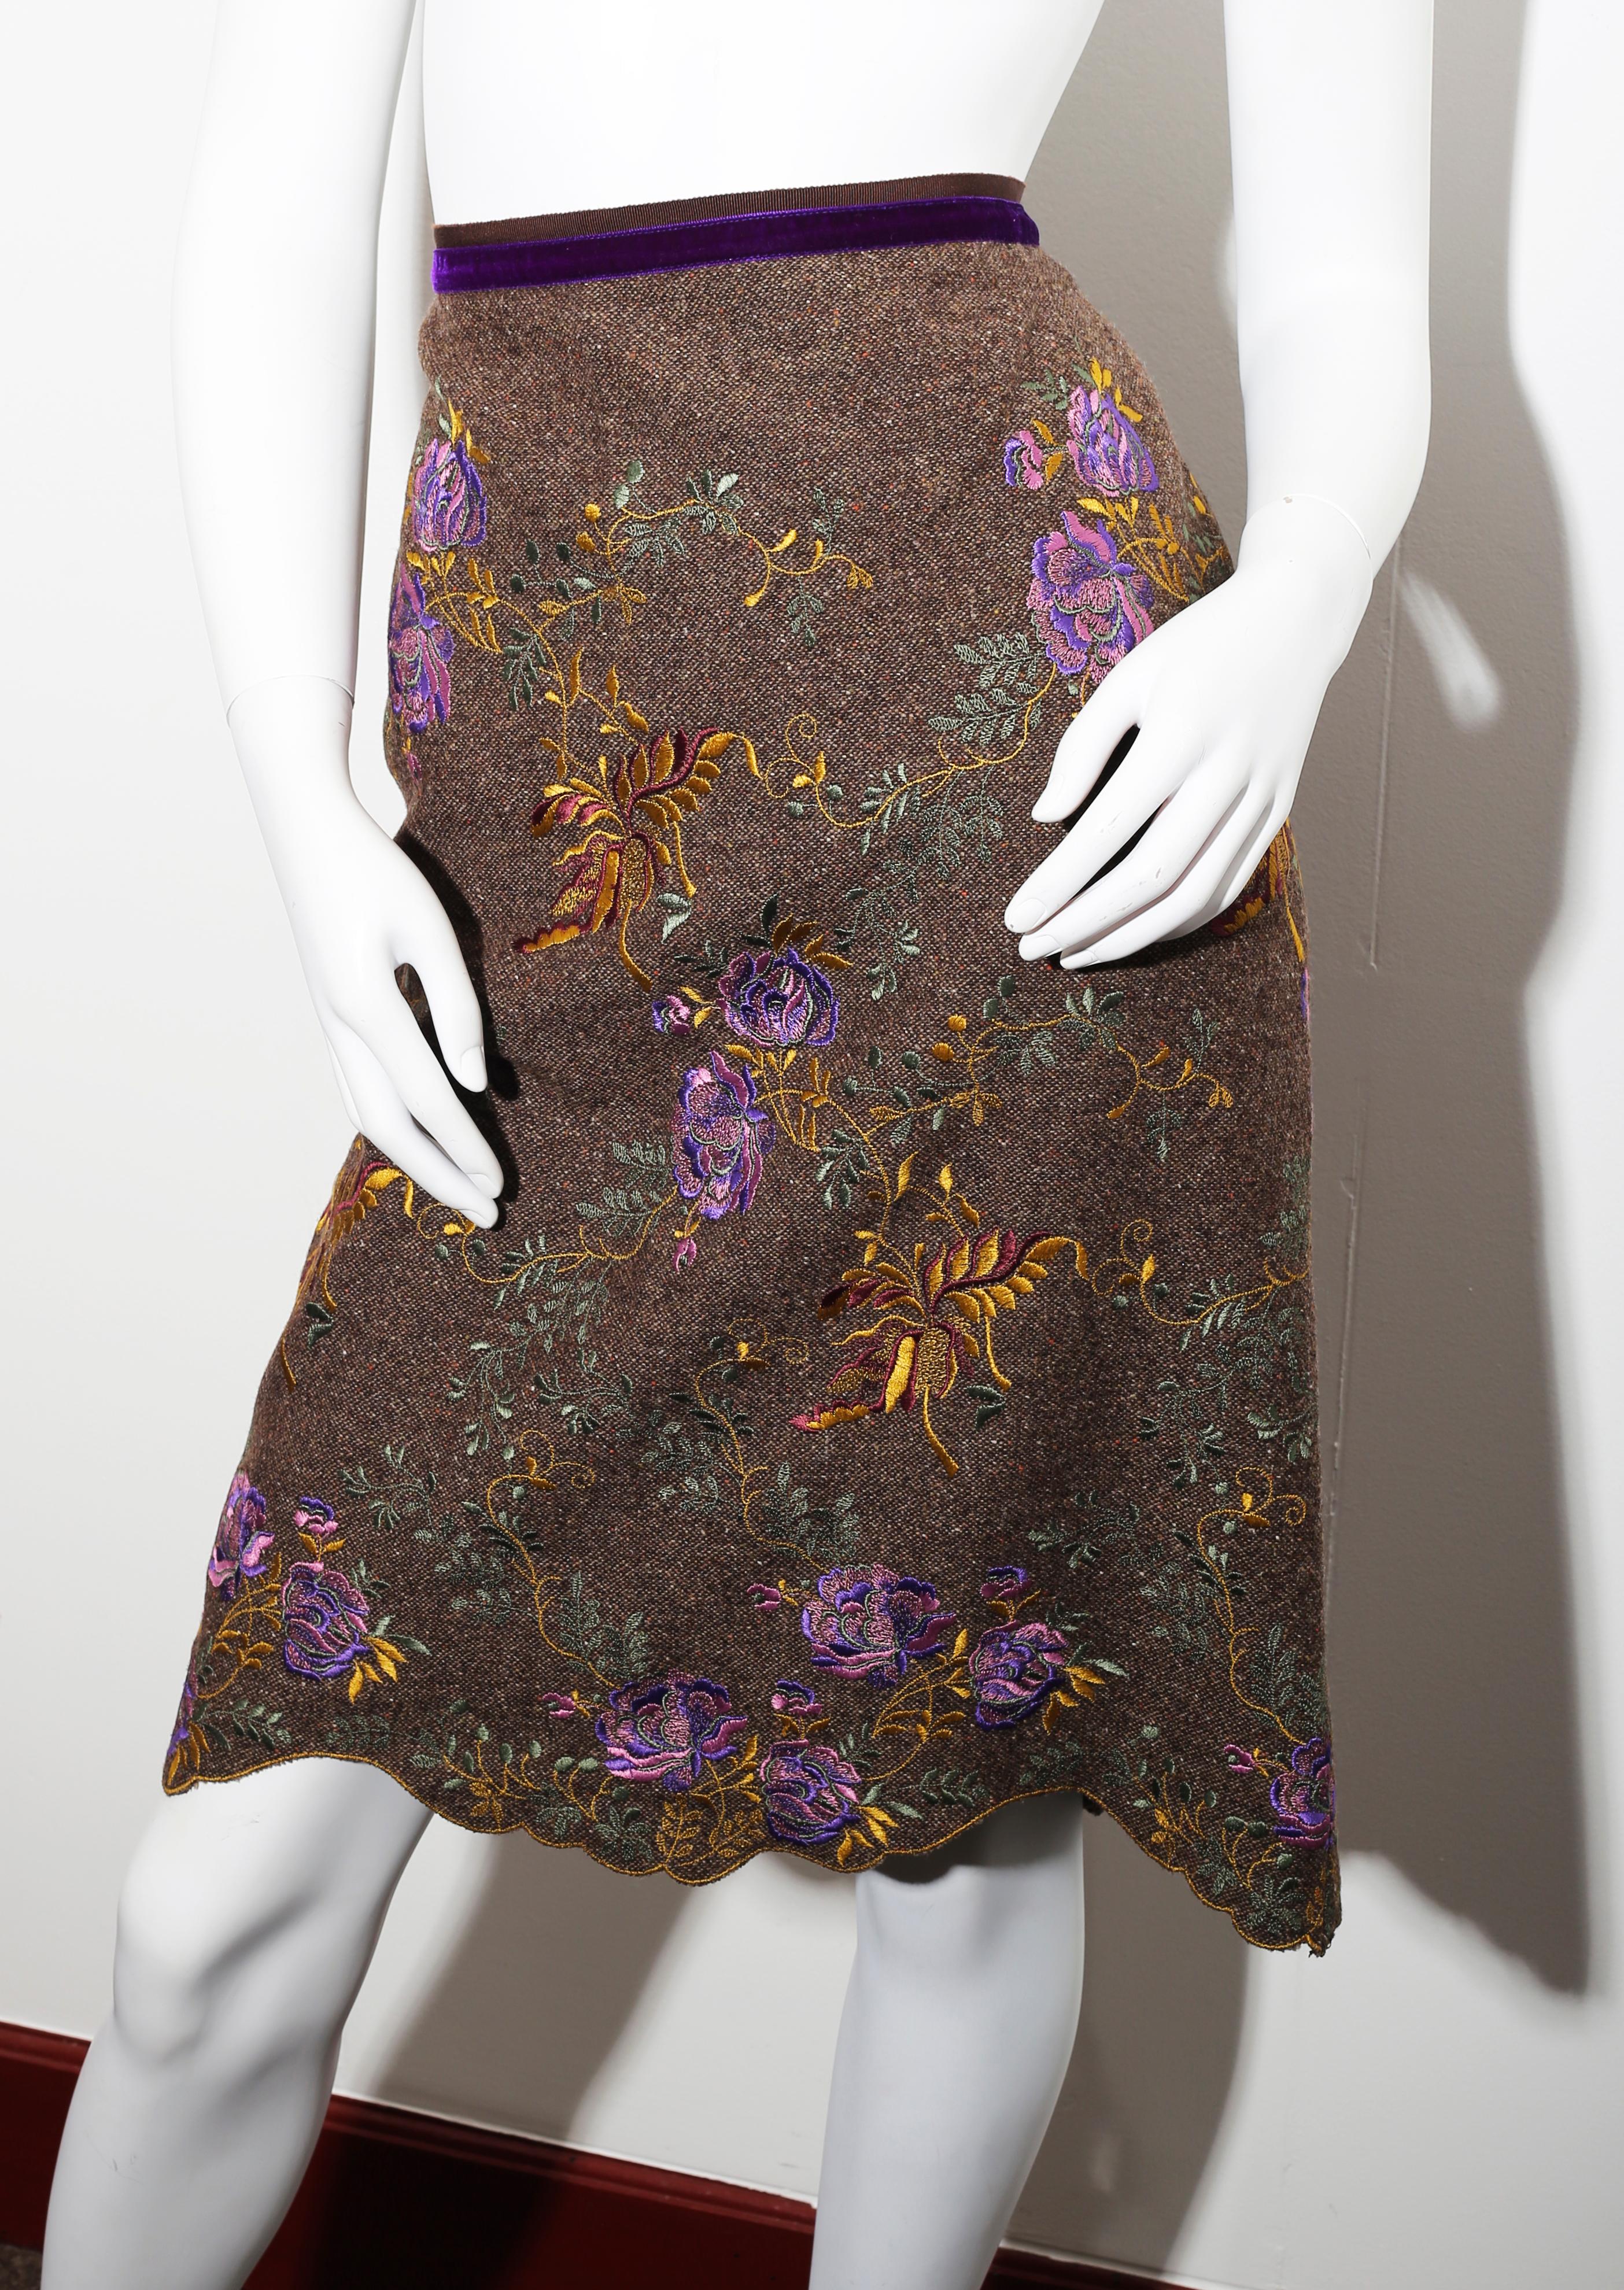 

Etro Silk velvet skirt with green skirt linen in swirling flower patterns in pastel bordeaux, black and beige colours. It’s crafted in Italy from gossamer silk chiffon and has fringed edges for an undone finish. Wear it over in winter season to